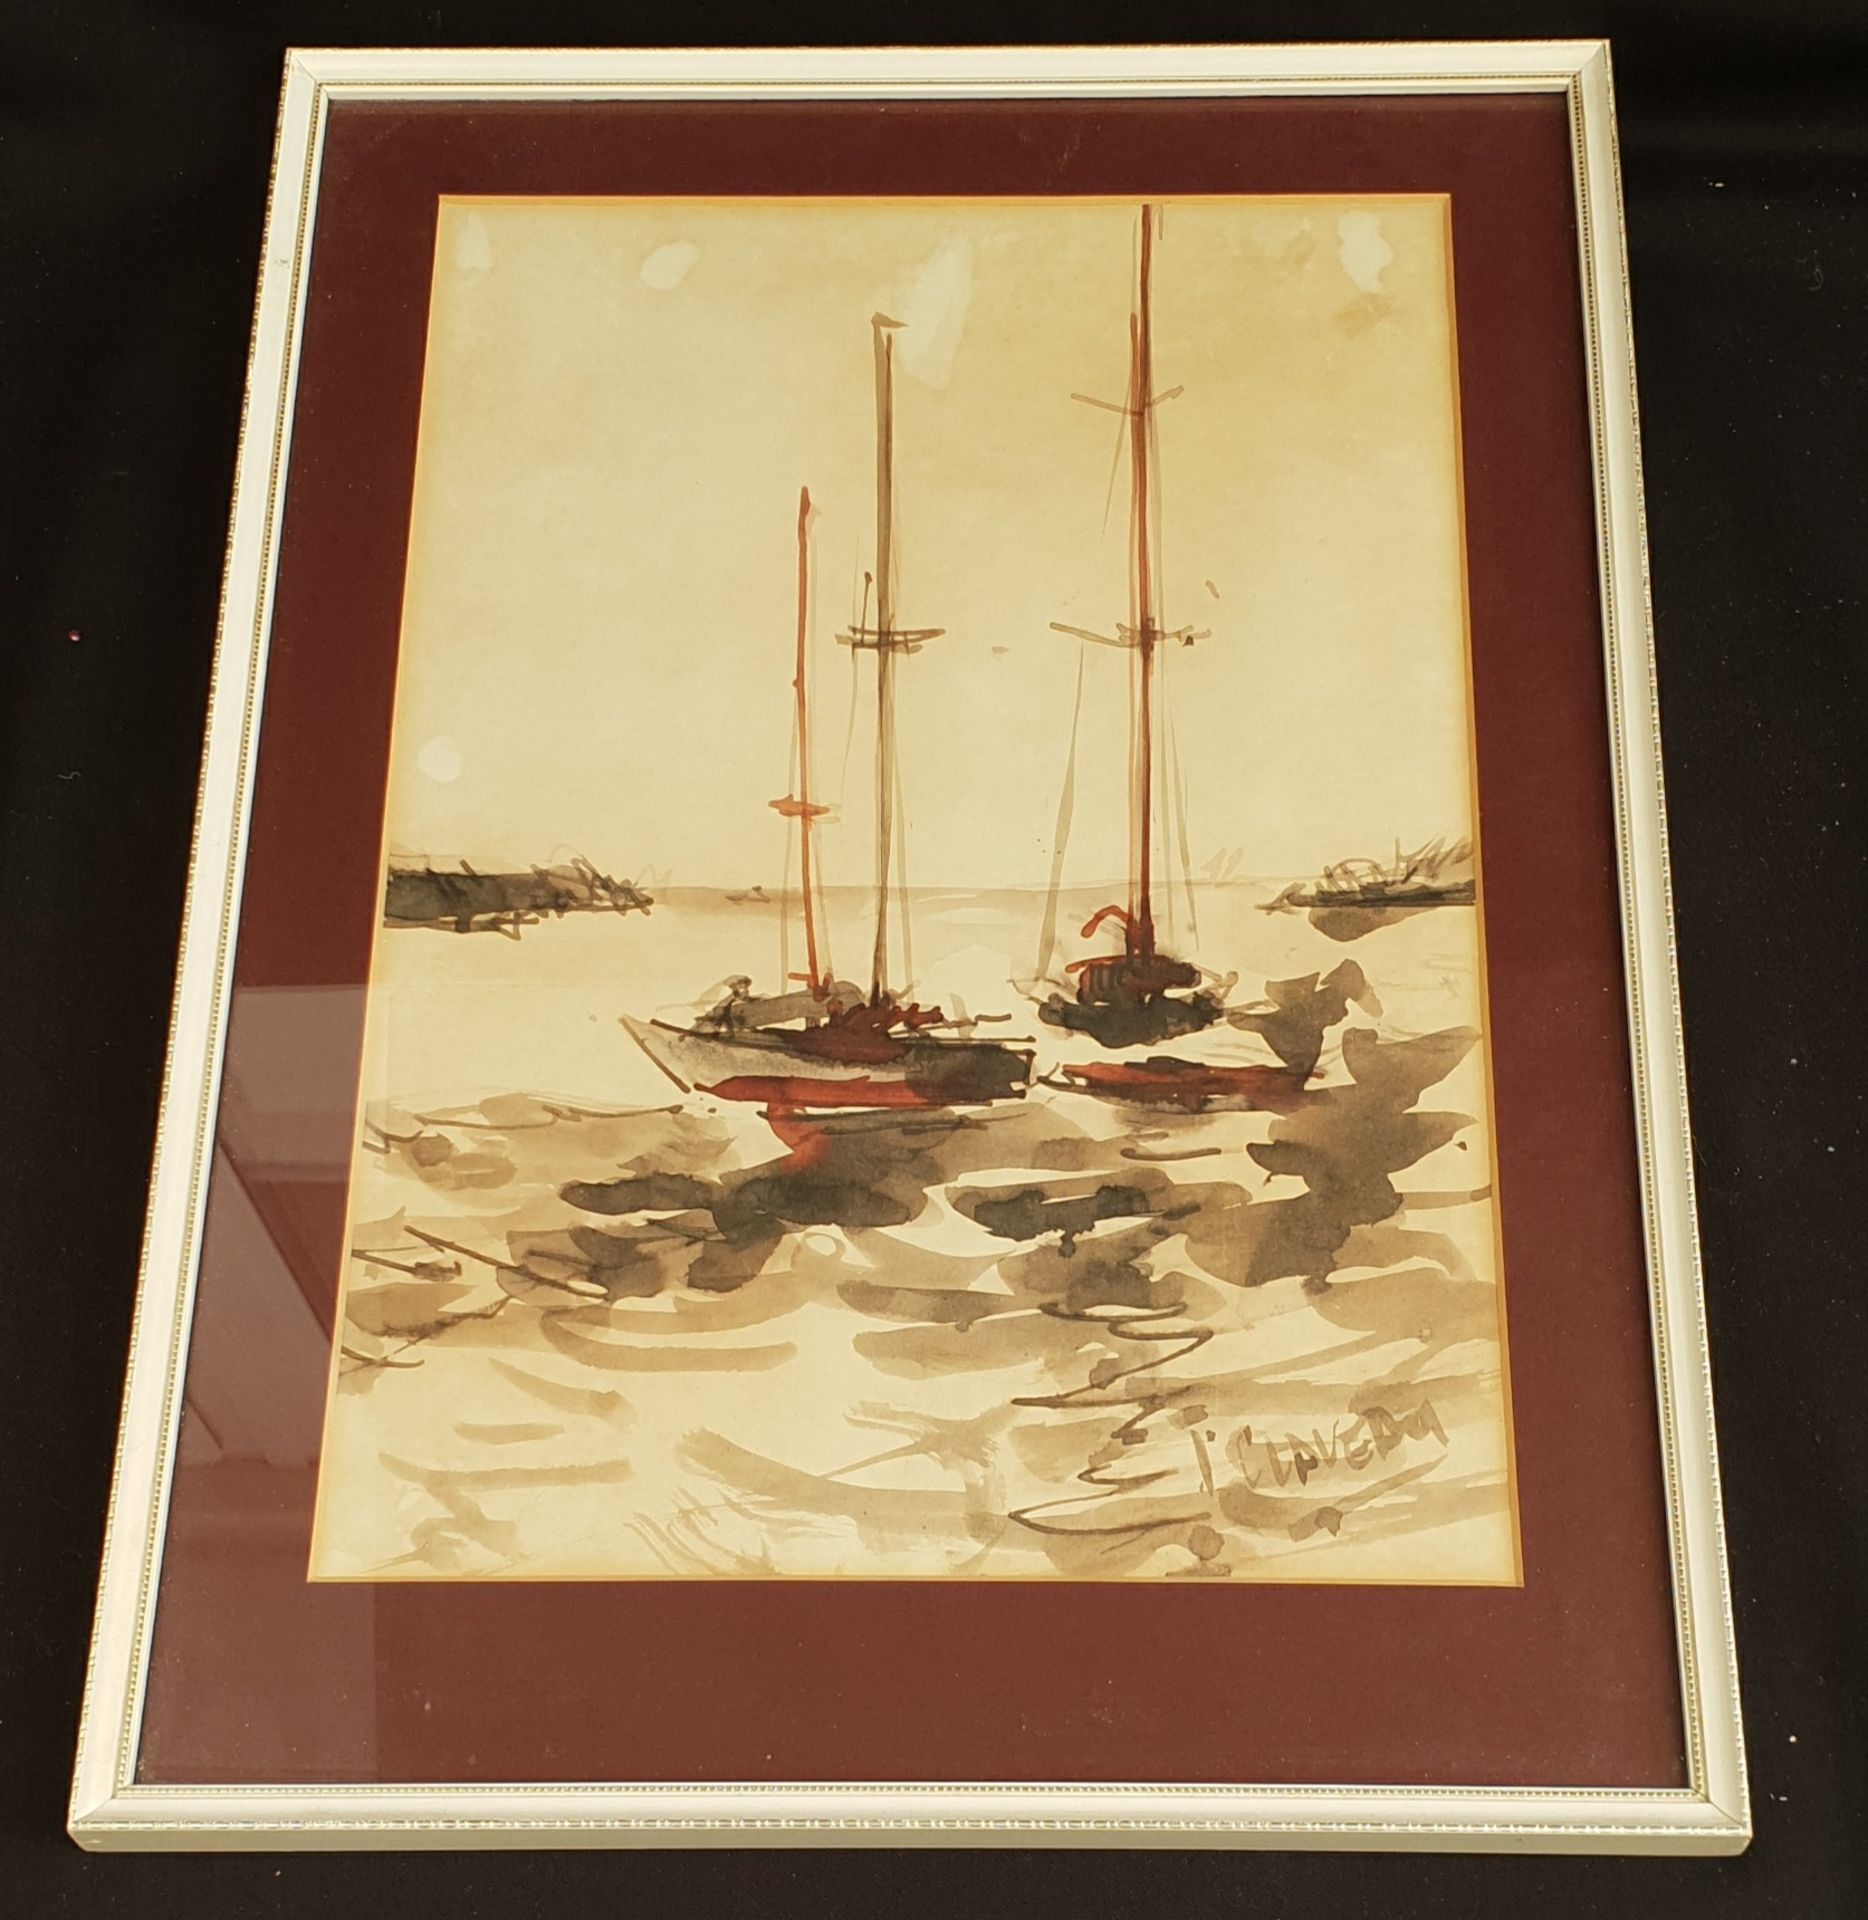 Vintage Art Framed Painting Watercolour Nautical Theme Signed Lower Right T Claverdon